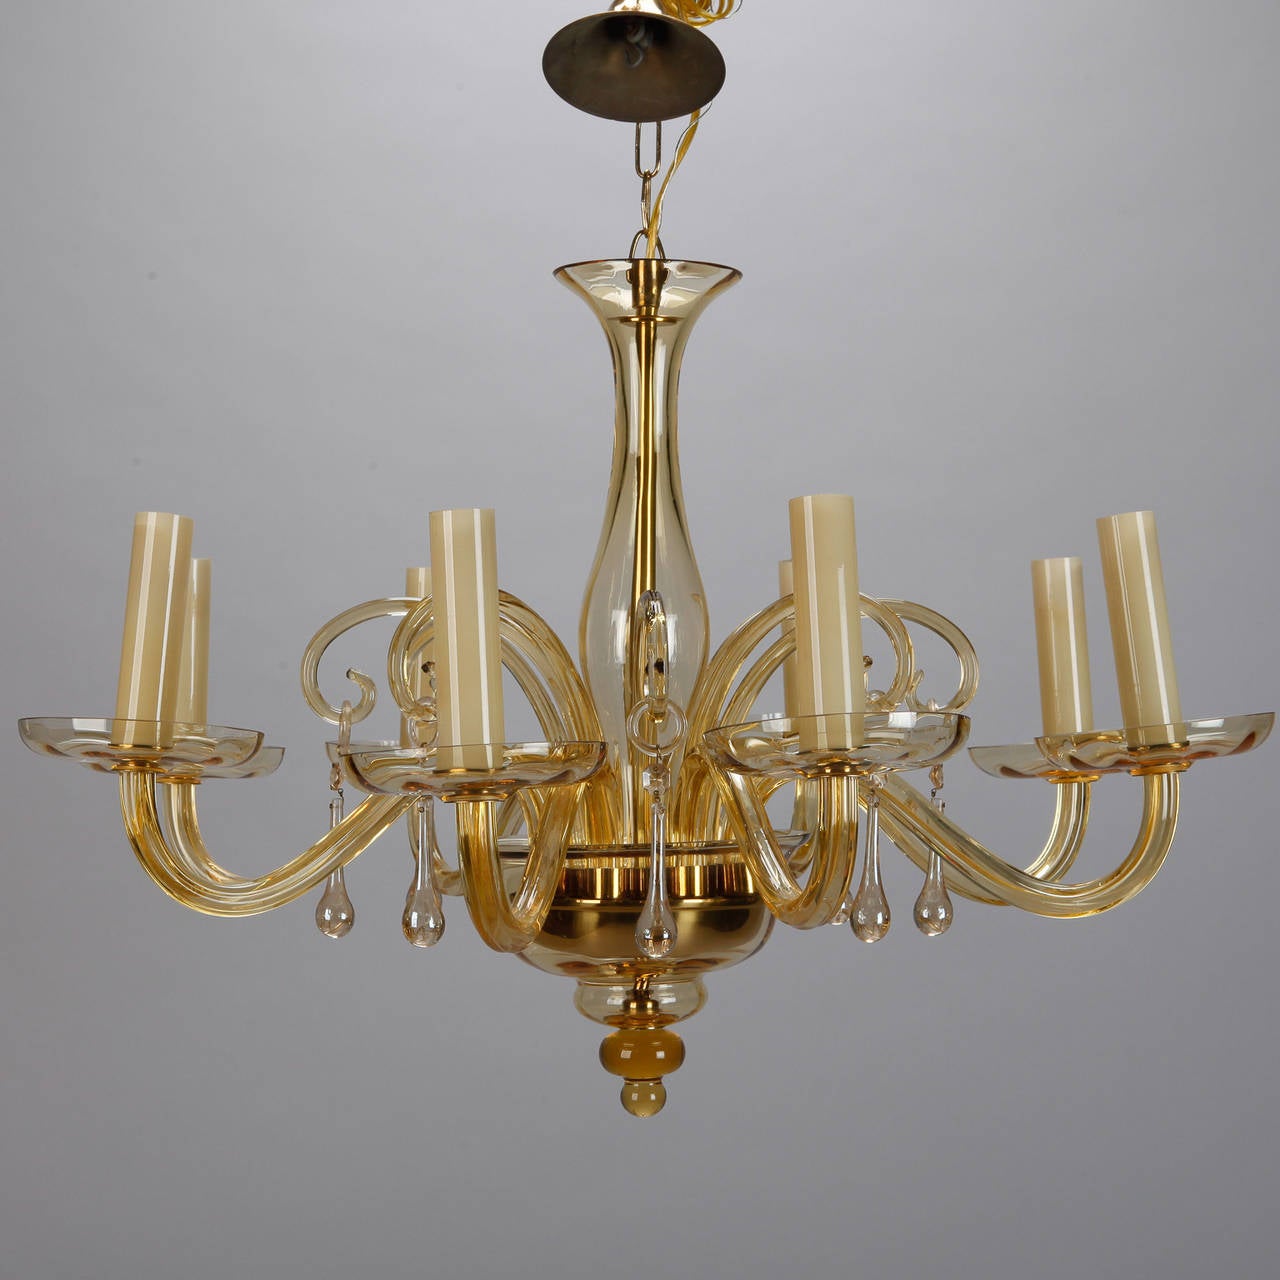 Circa 1940s Murano glass chandelier with eight candle style lights, amber colored hand blown glass center support, arms, bobeches and curled arms and dangling drops. New wiring for US electrical standards.